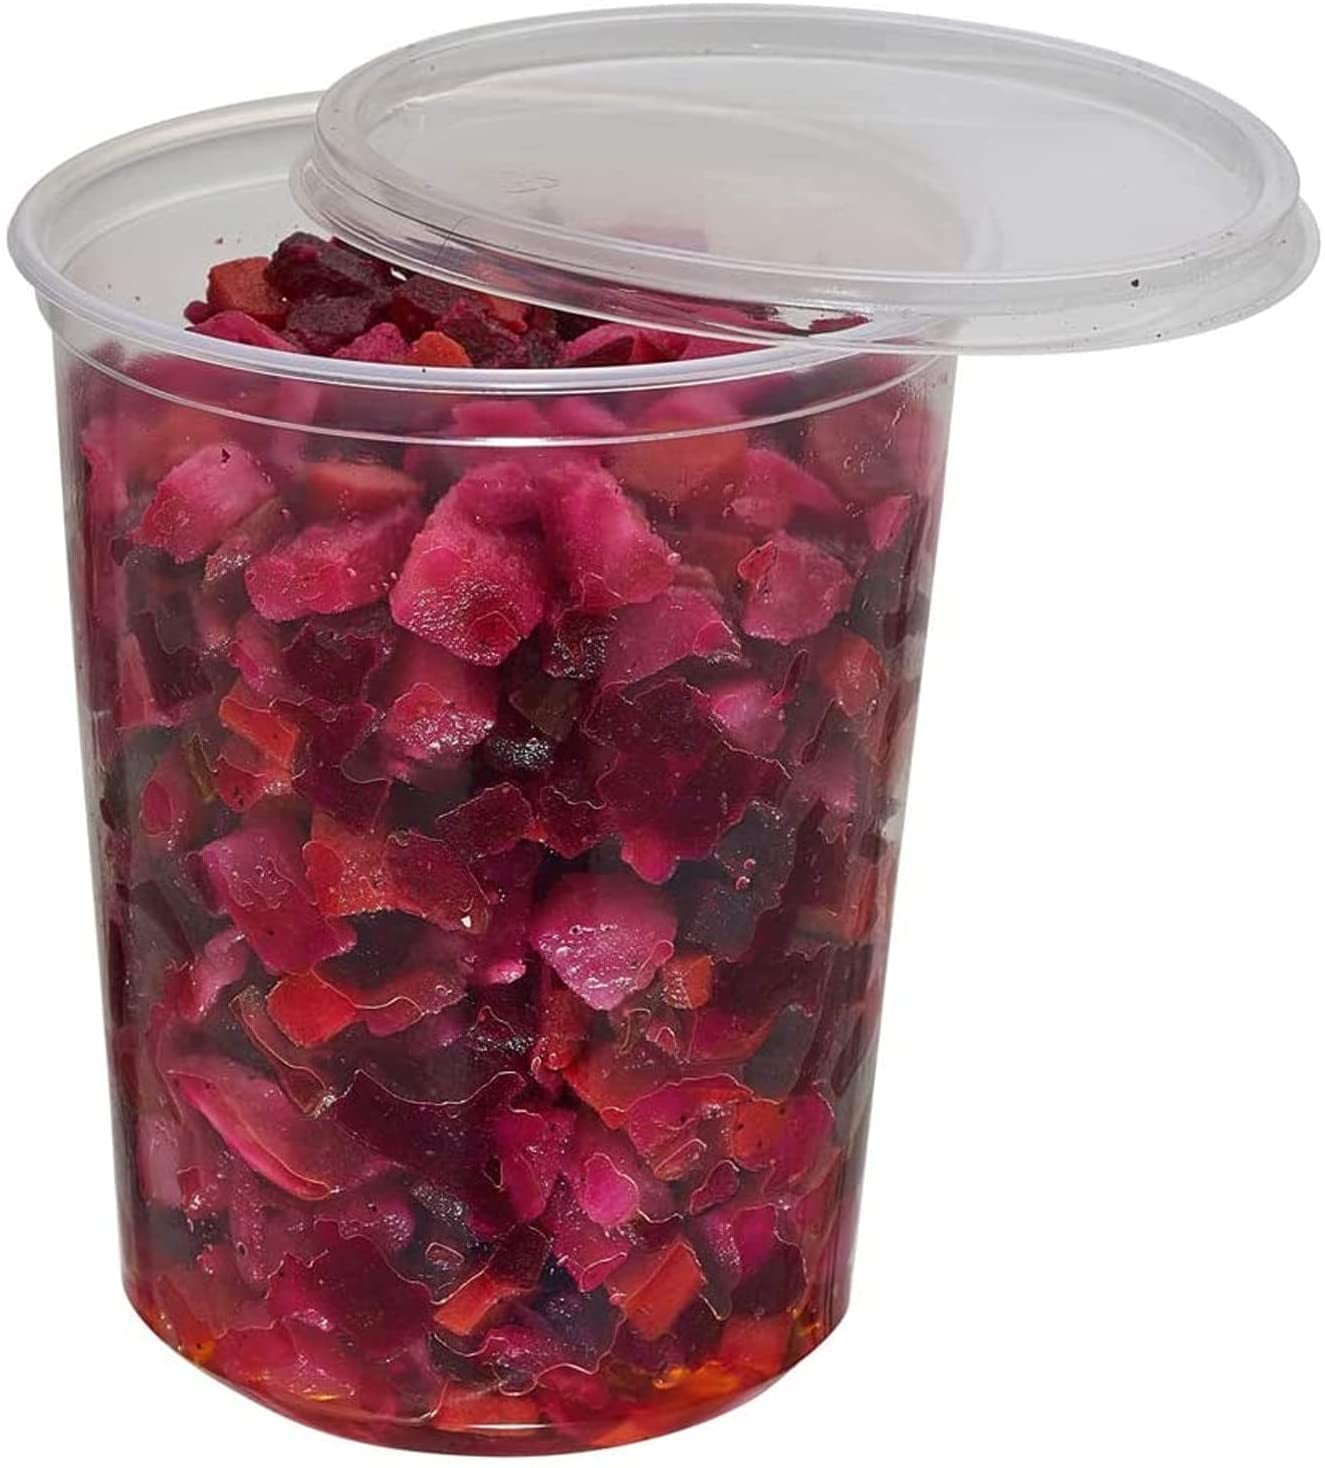 Nicole Home Collection Microwaveable Round Containers, Clear, 8 oz - 10 count